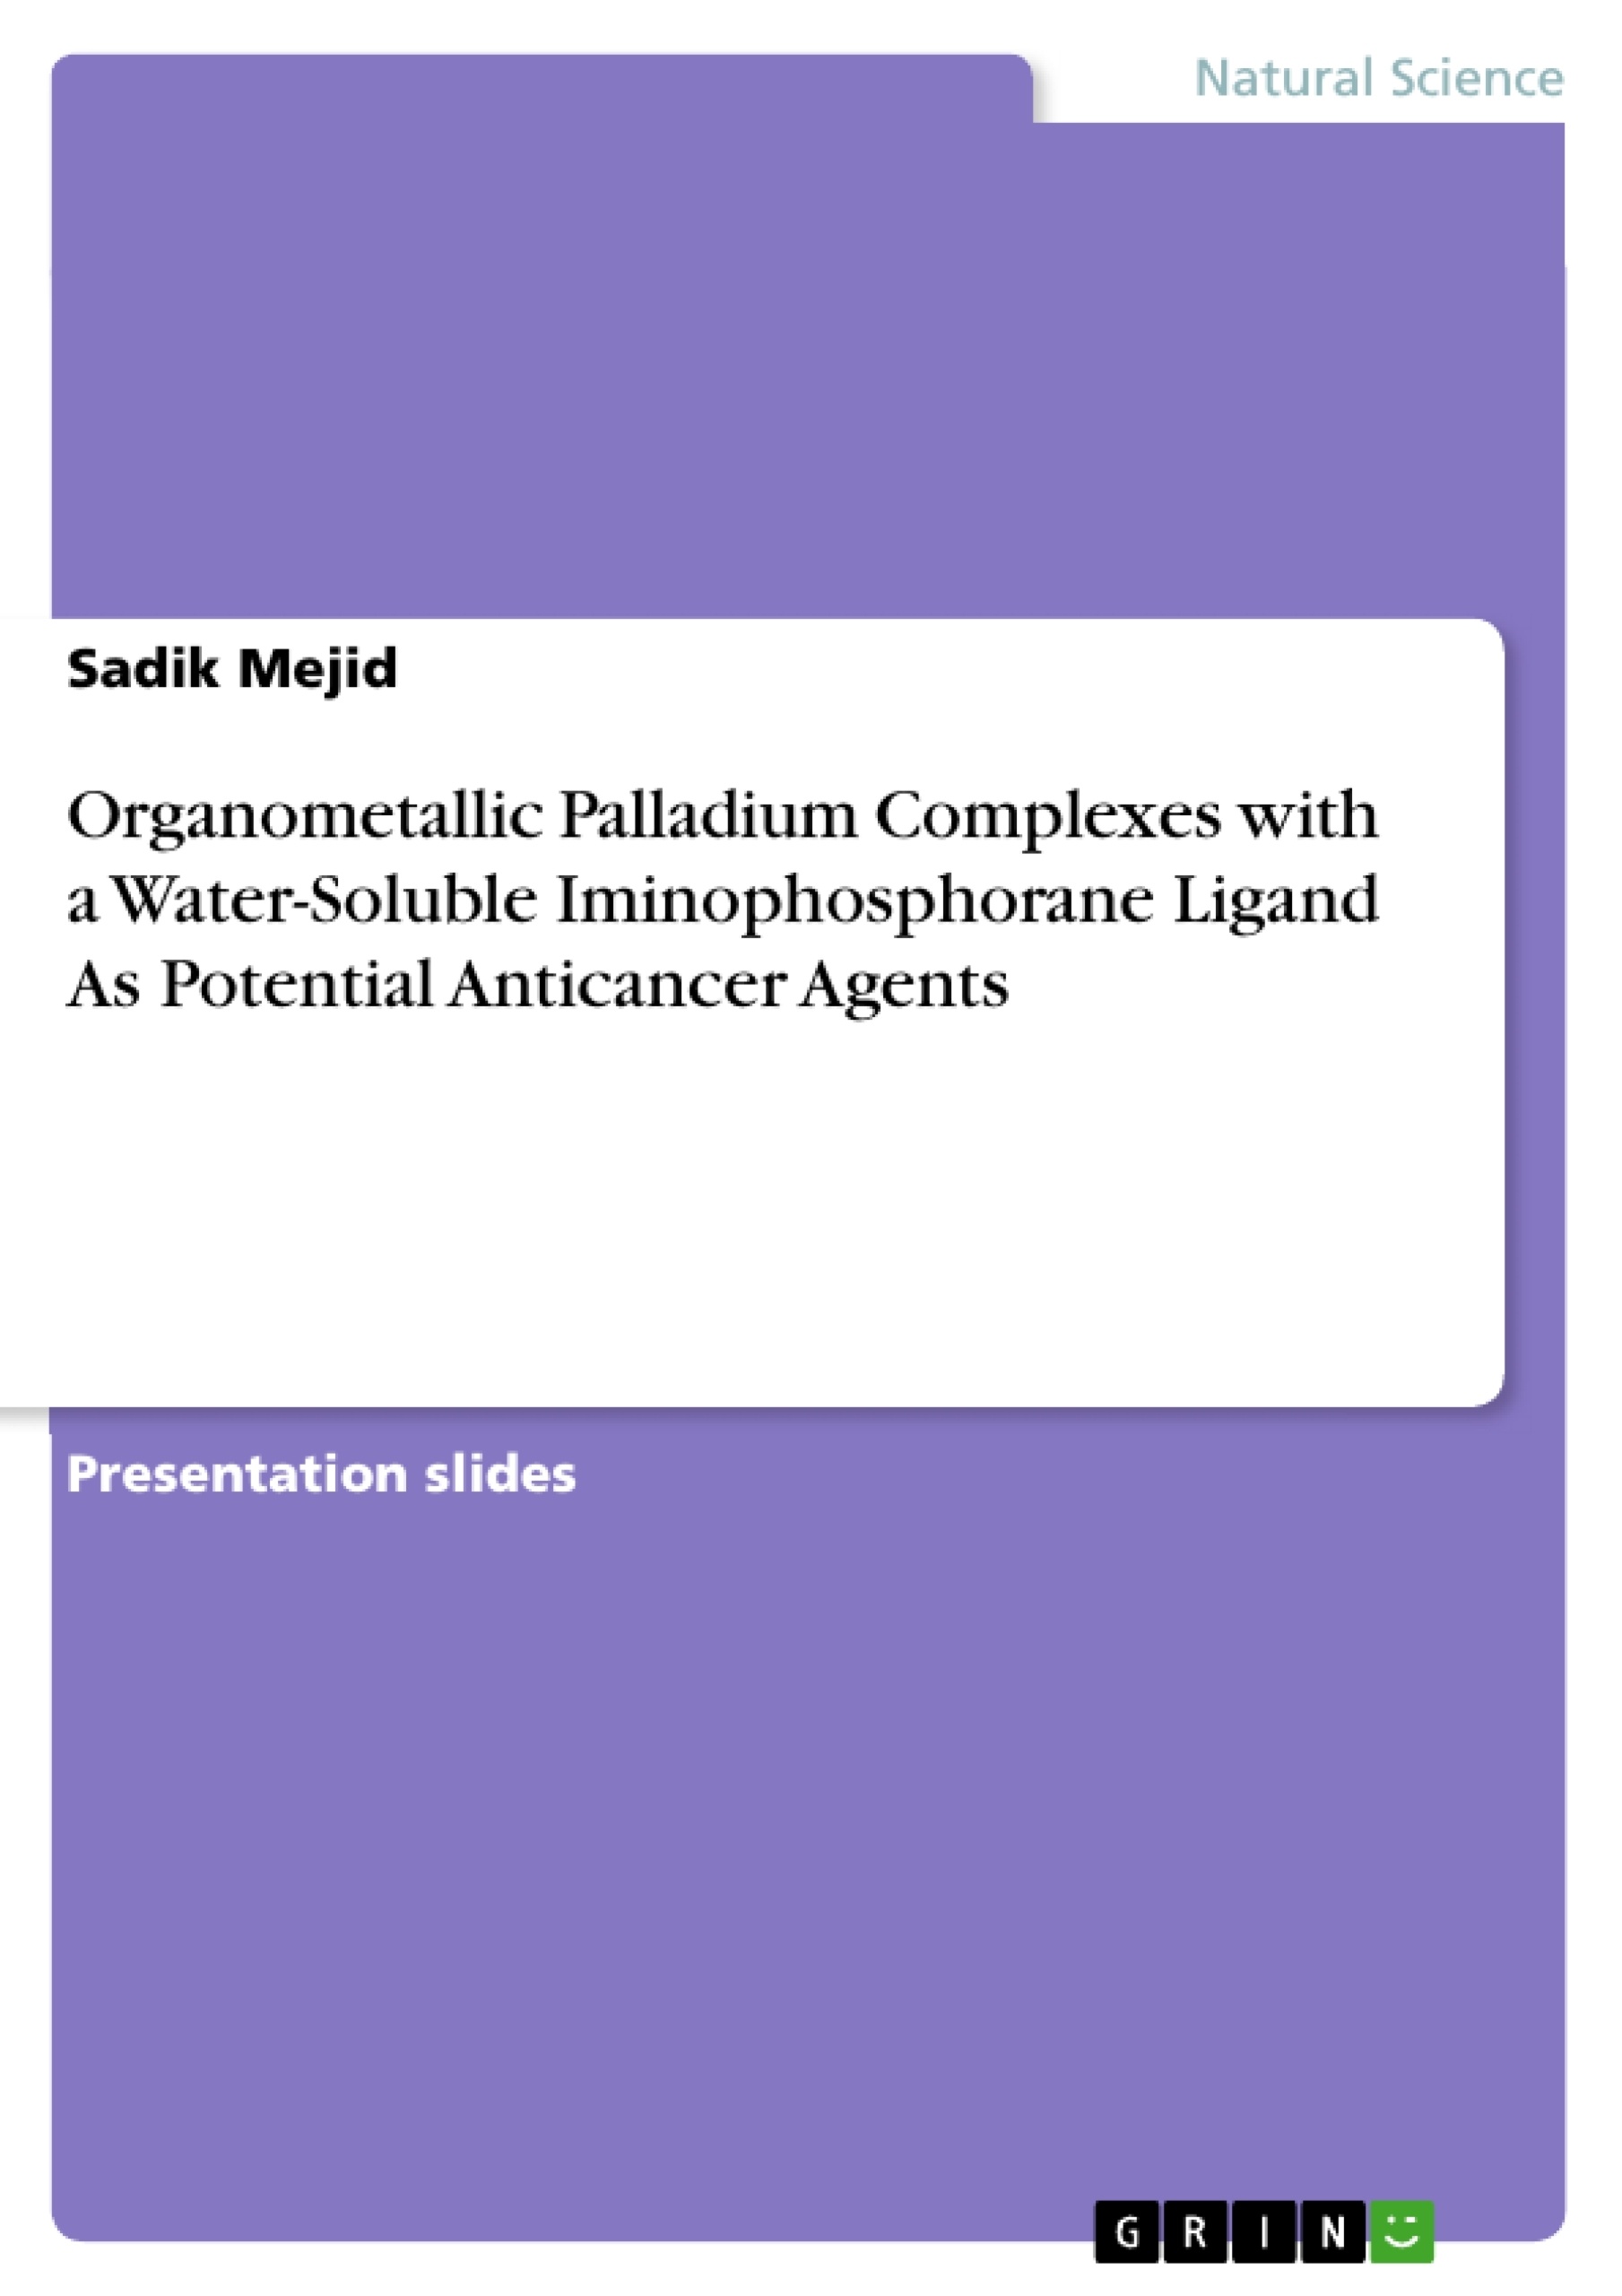 Titre: Organometallic Palladium Complexes with a Water-Soluble Iminophosphorane Ligand As Potential Anticancer Agents